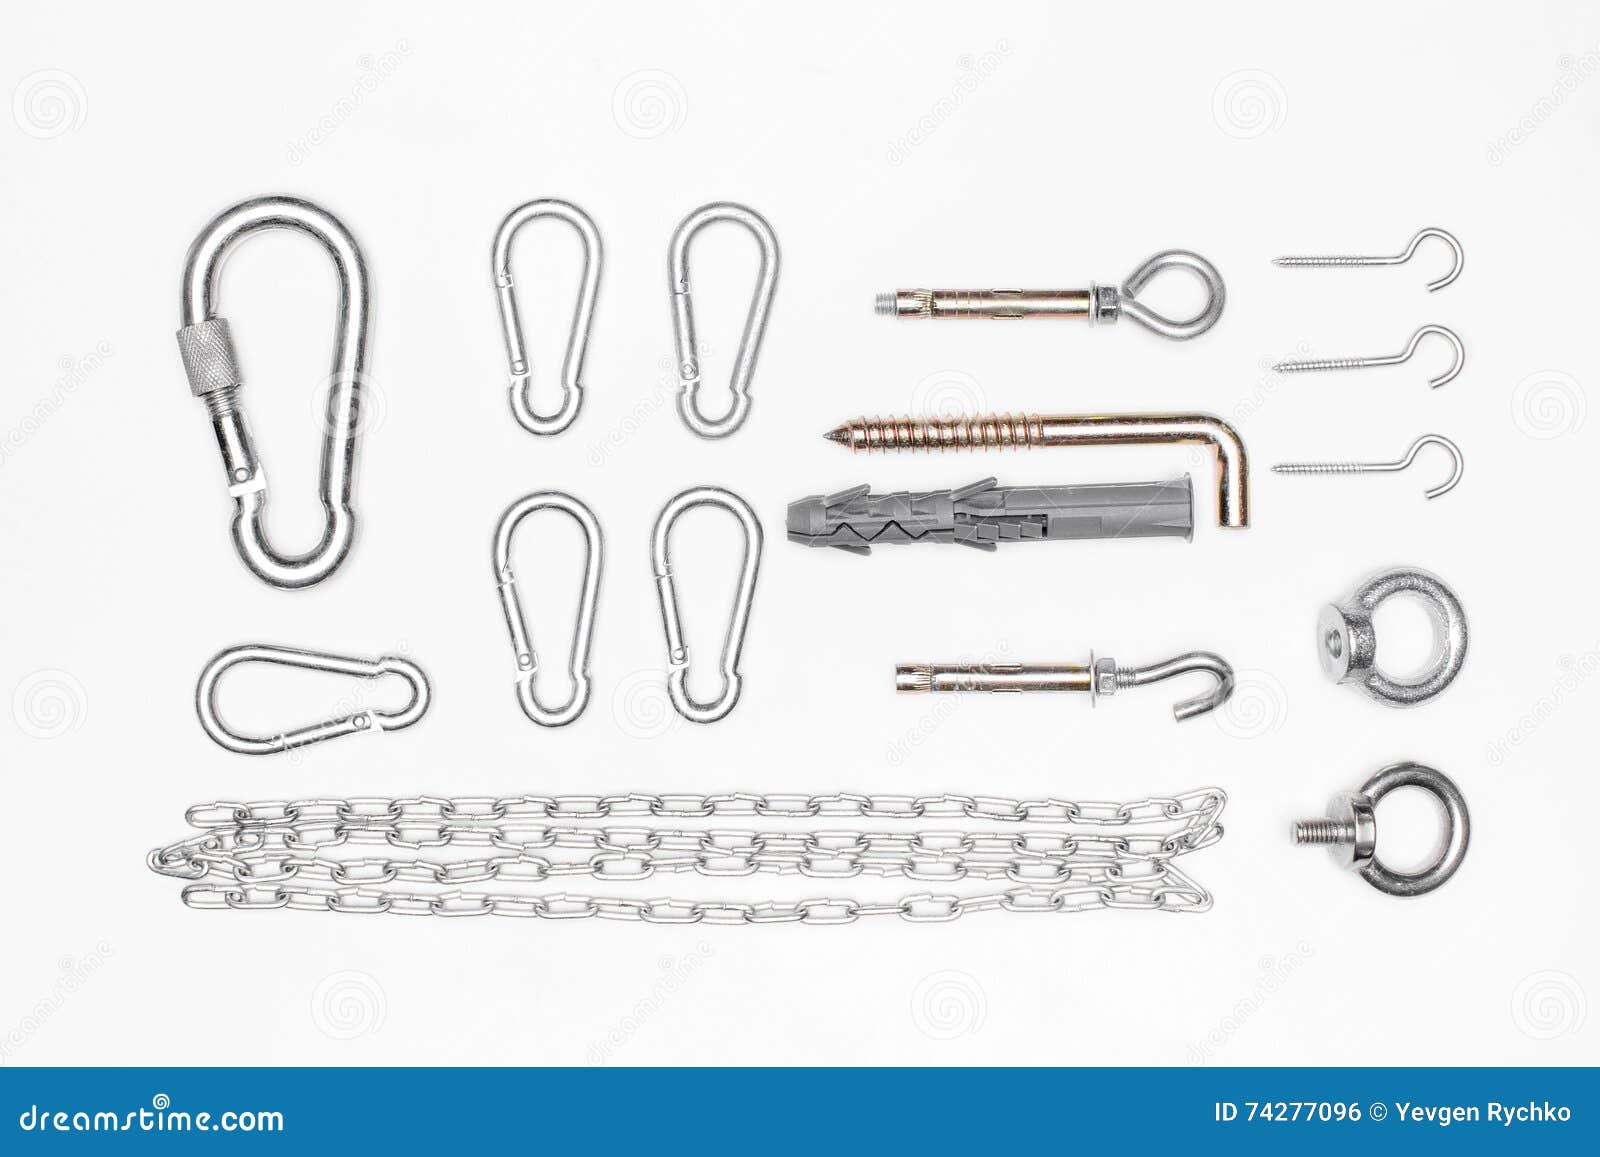 Different types of hooks stock photo. Image of item, accessory - 74277096